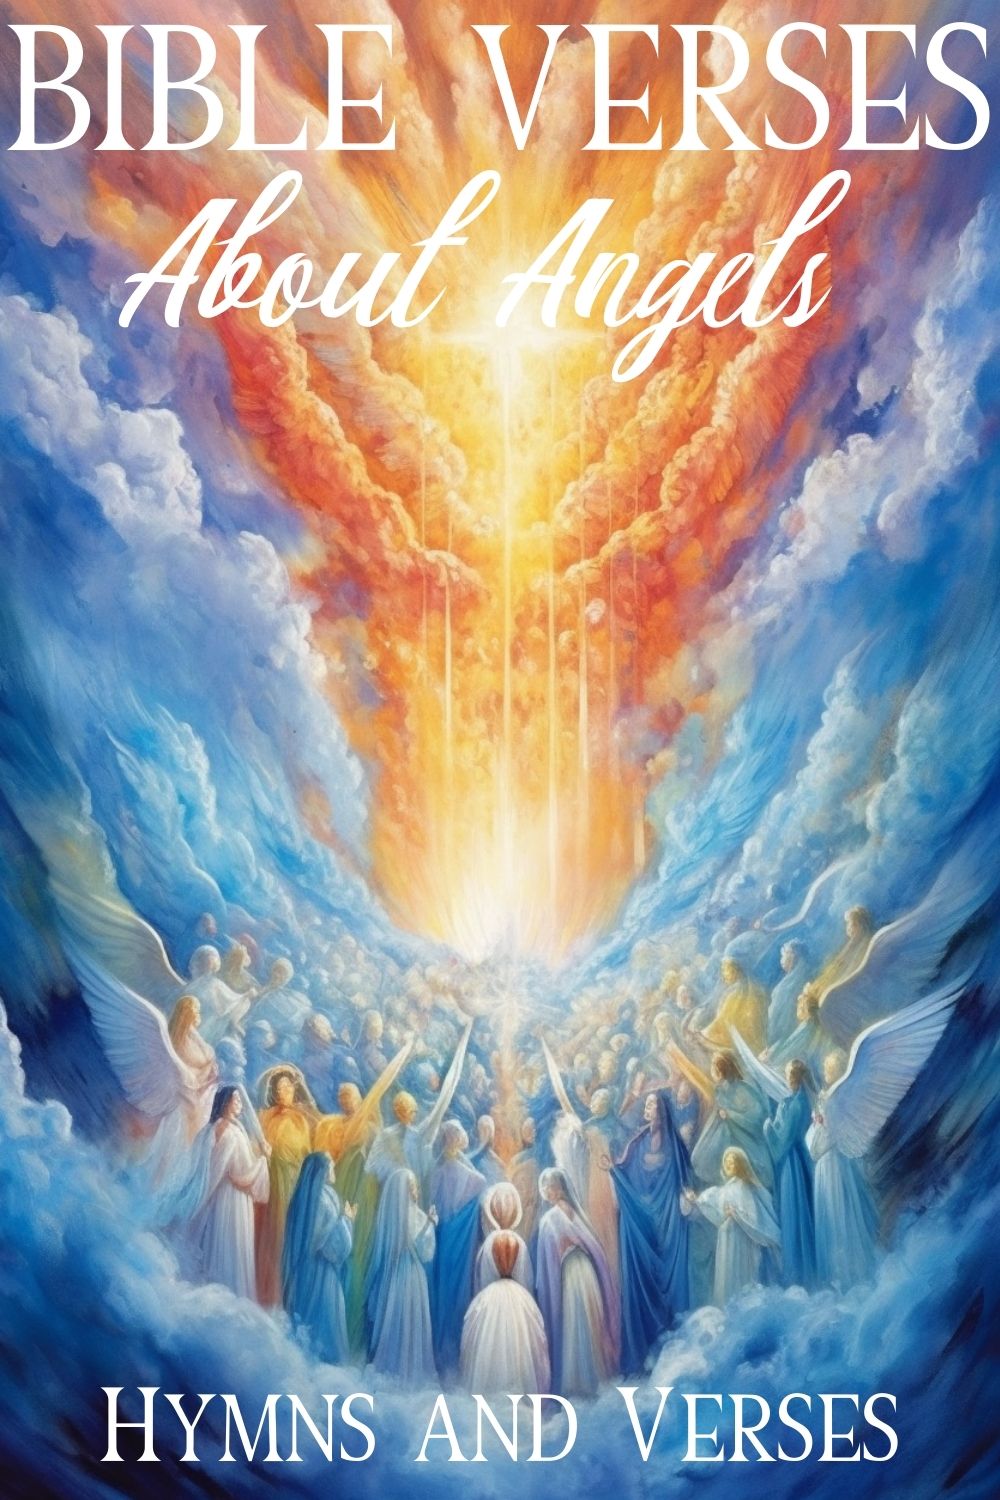 pinterest pin about bible verses about angels with watercolor image of angels in heaven